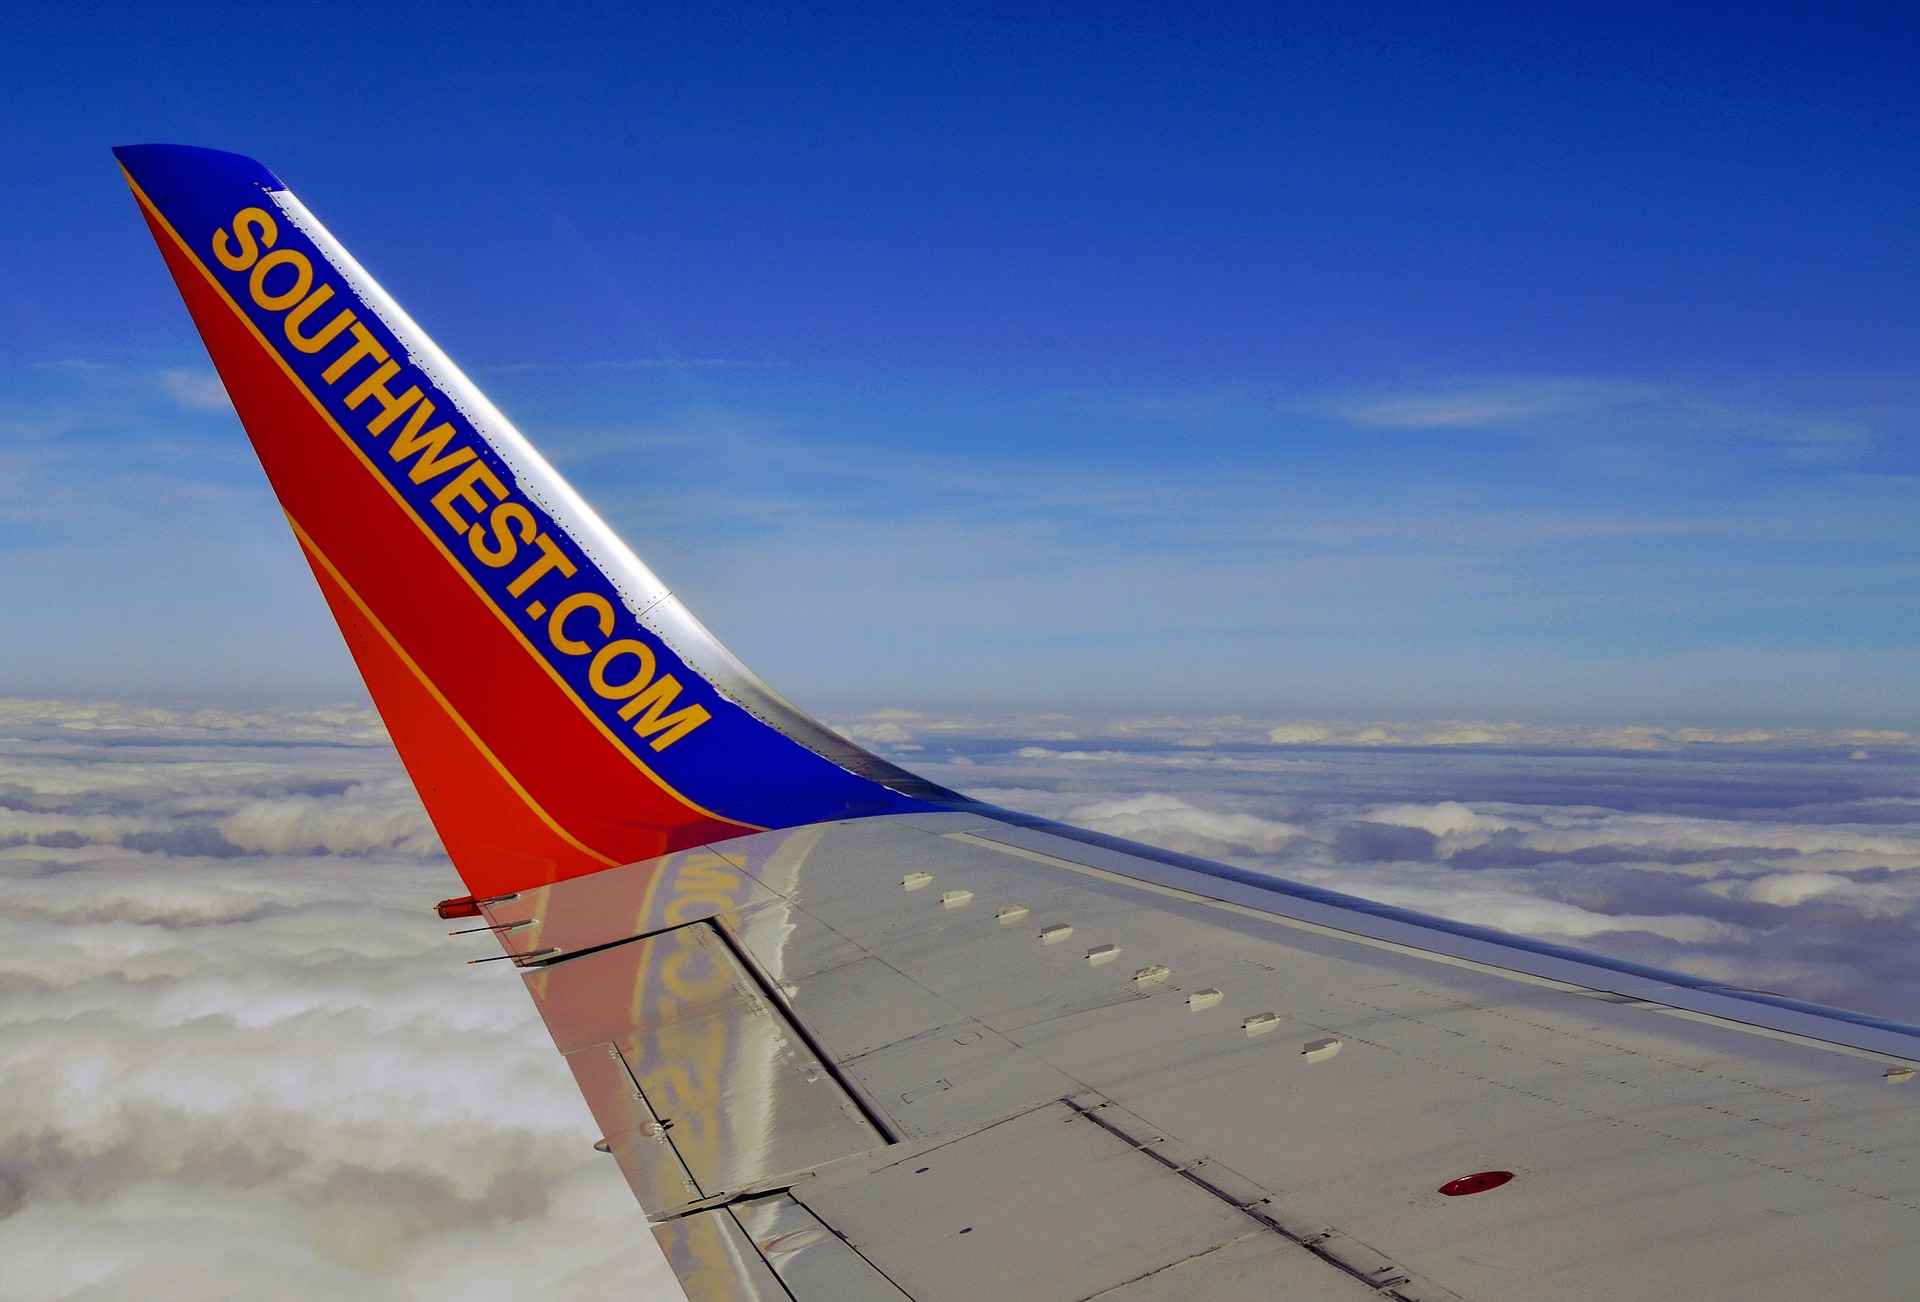 Flying with Southwest Airlines? Here's what you need to know about their policy so that you can bring your portable oxygen concentrator on your next flight.